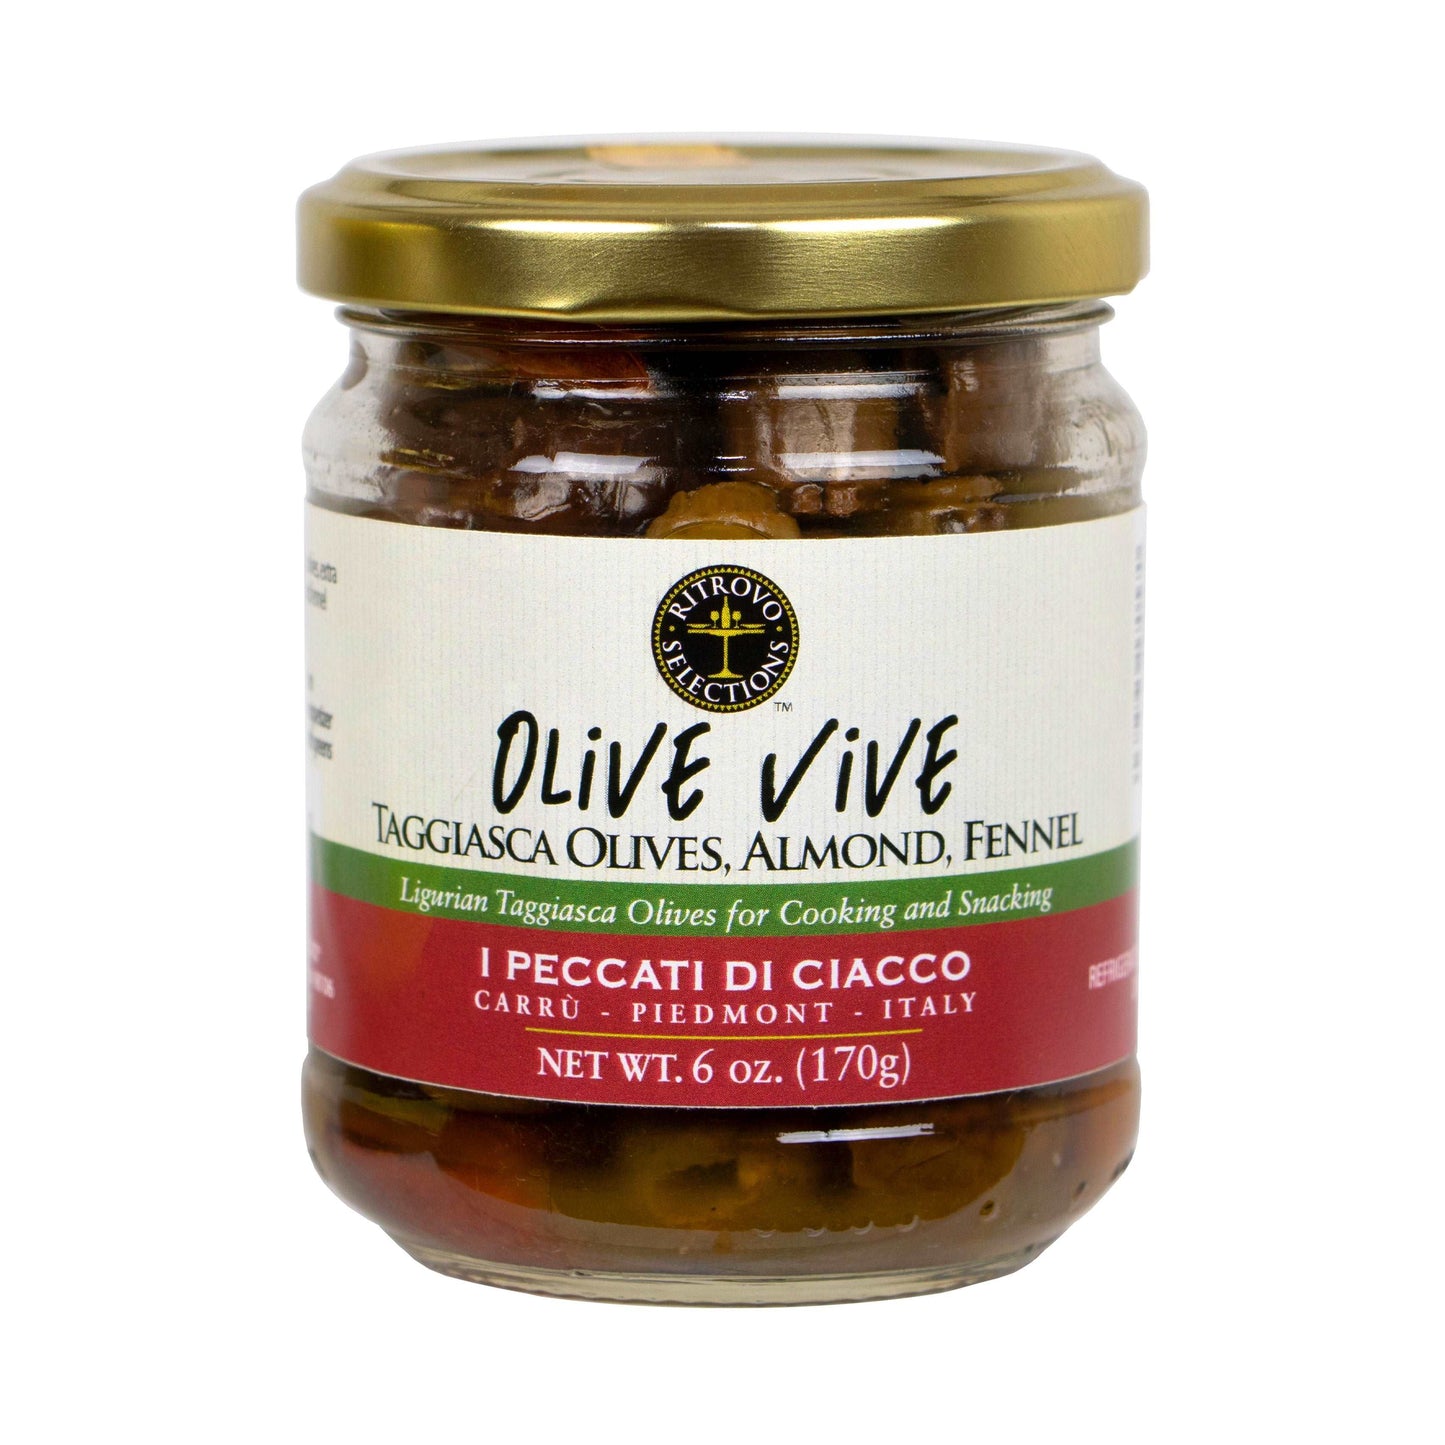 Ciacco Olive Vive, Taggiasca Olives with Almonds